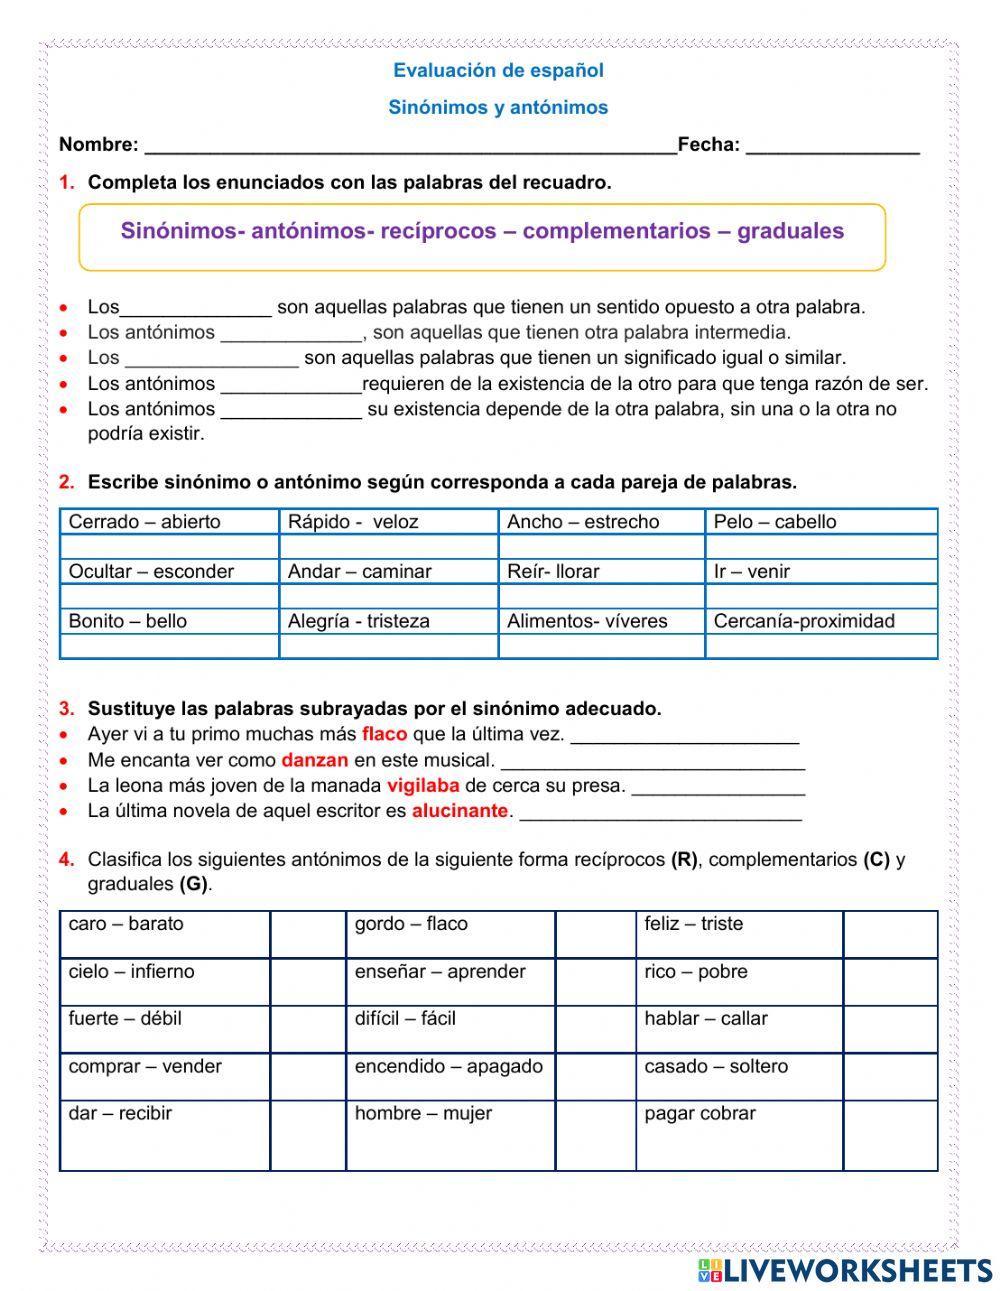 Sinónimos y antónimos online exercise for Quinto | Live Worksheets